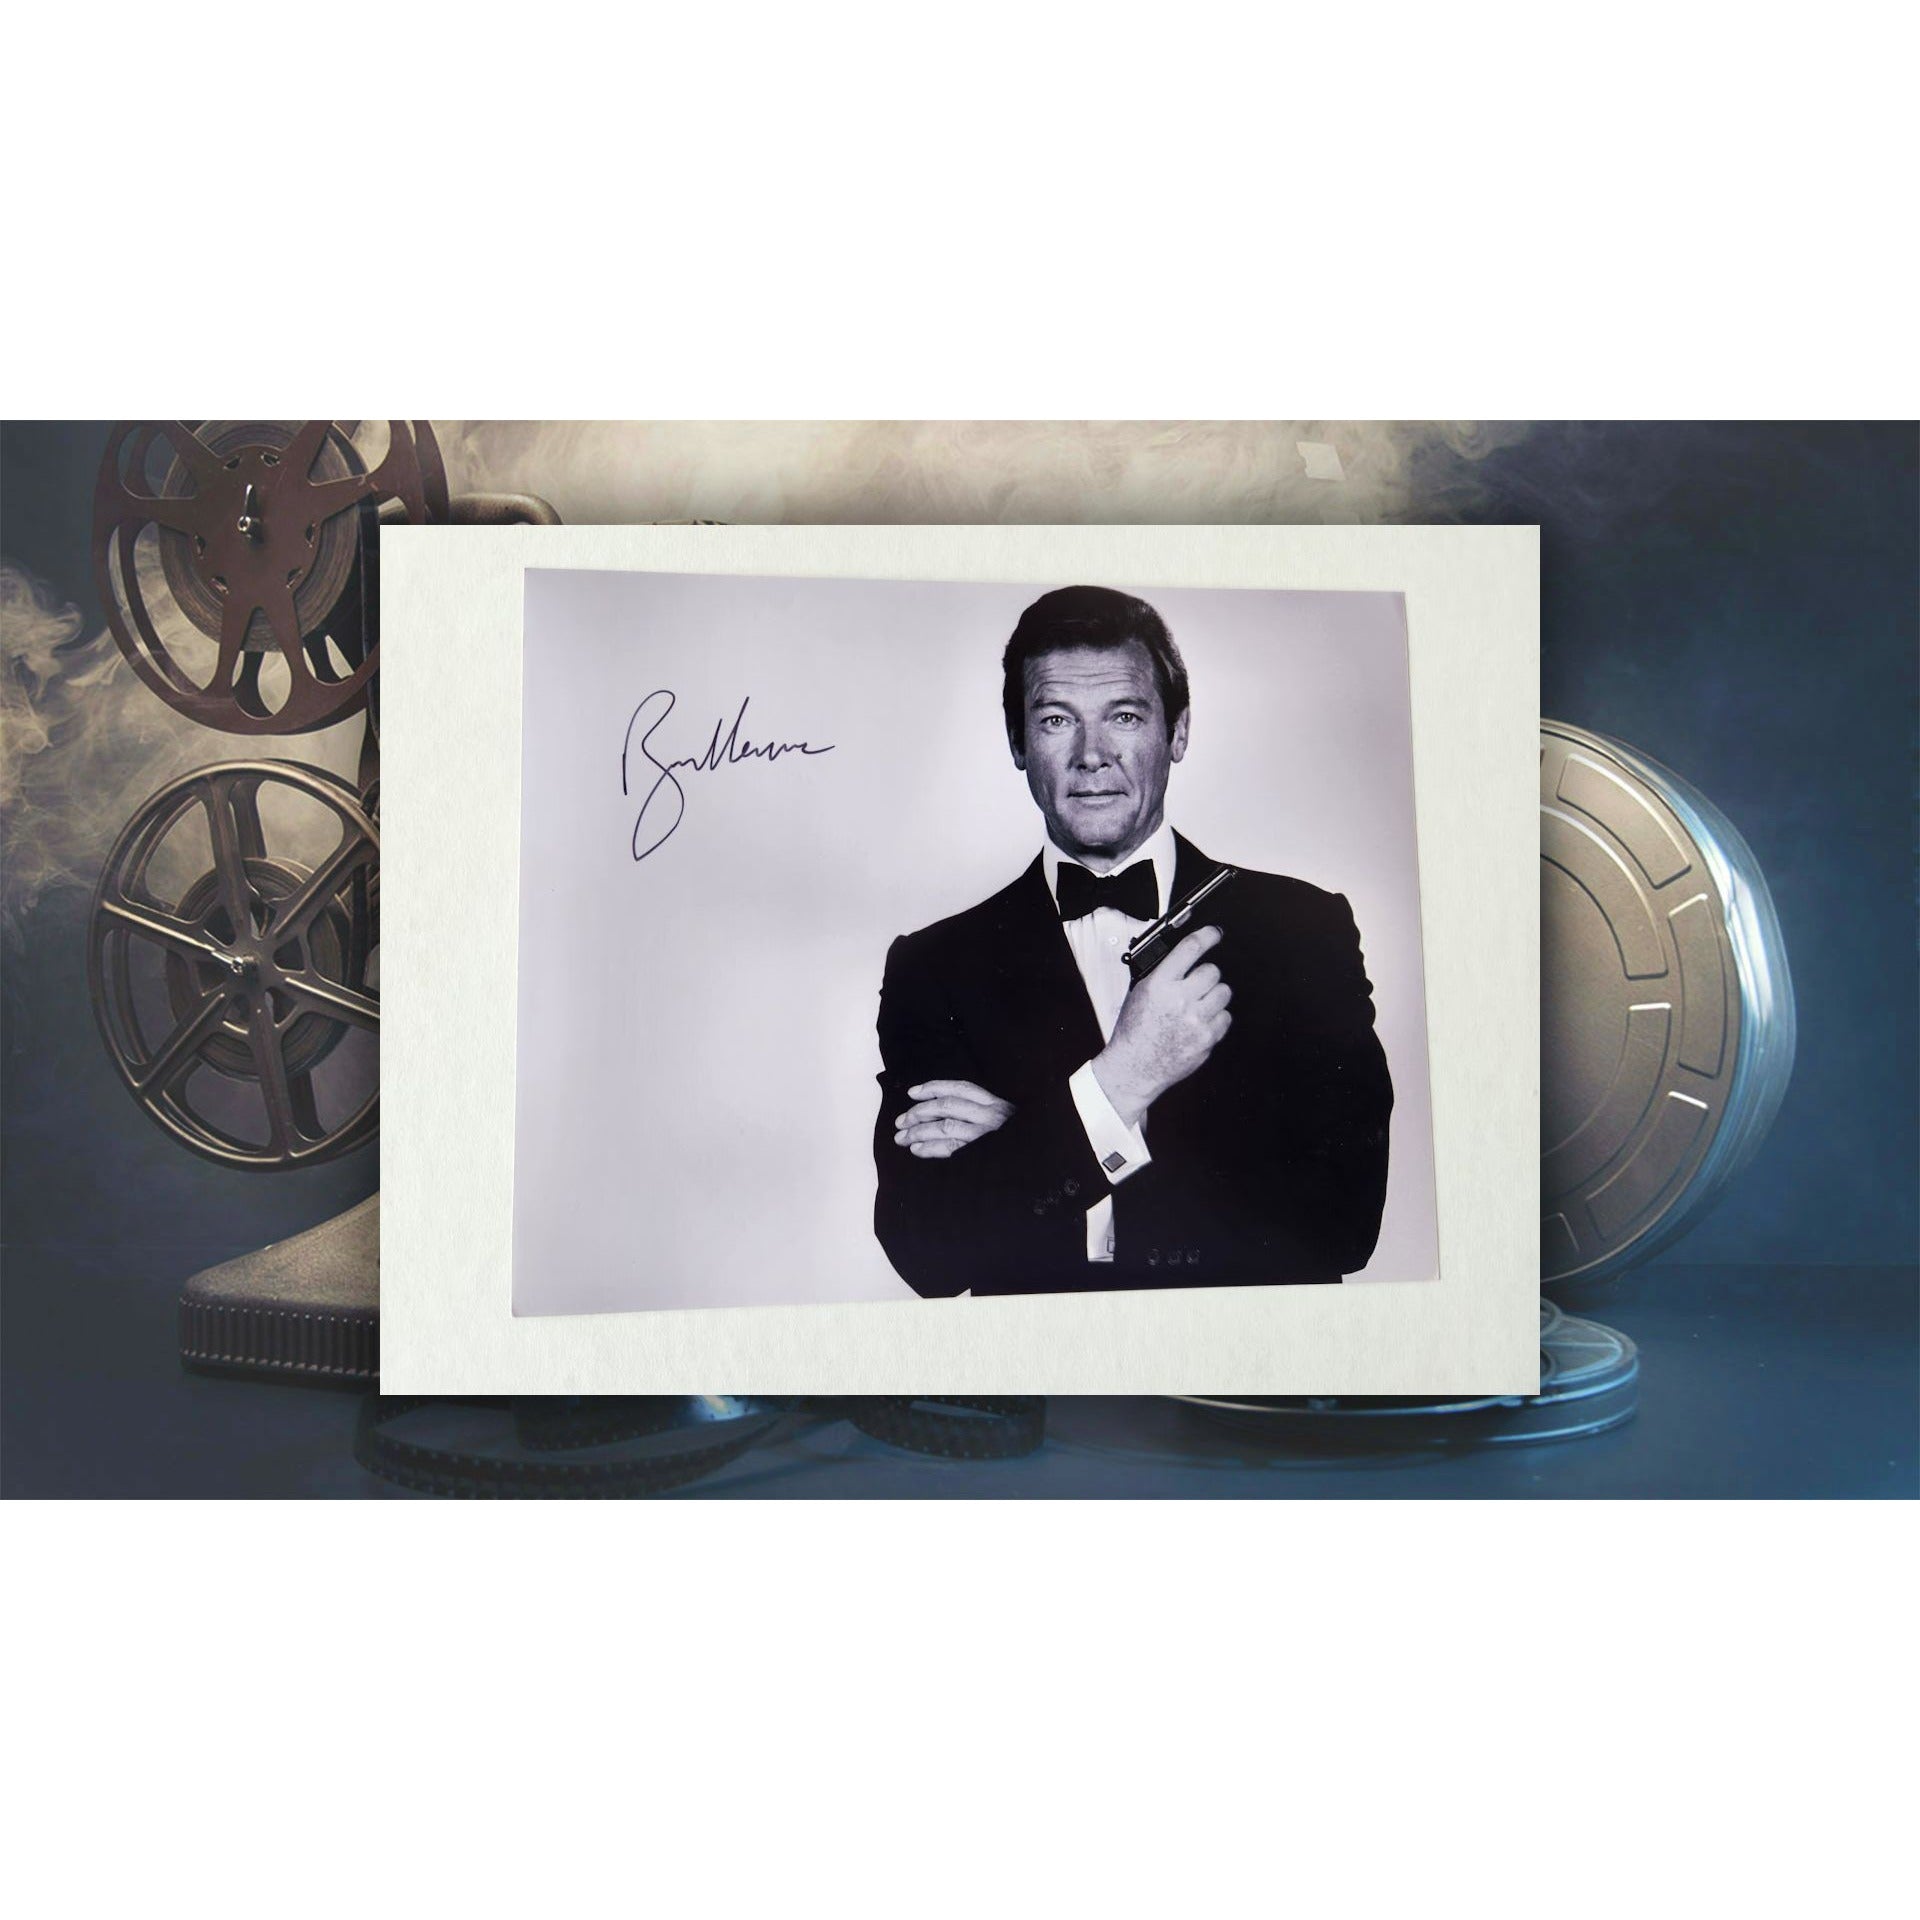 Roger Moore James Bond 007 8x10 photo signed with proof